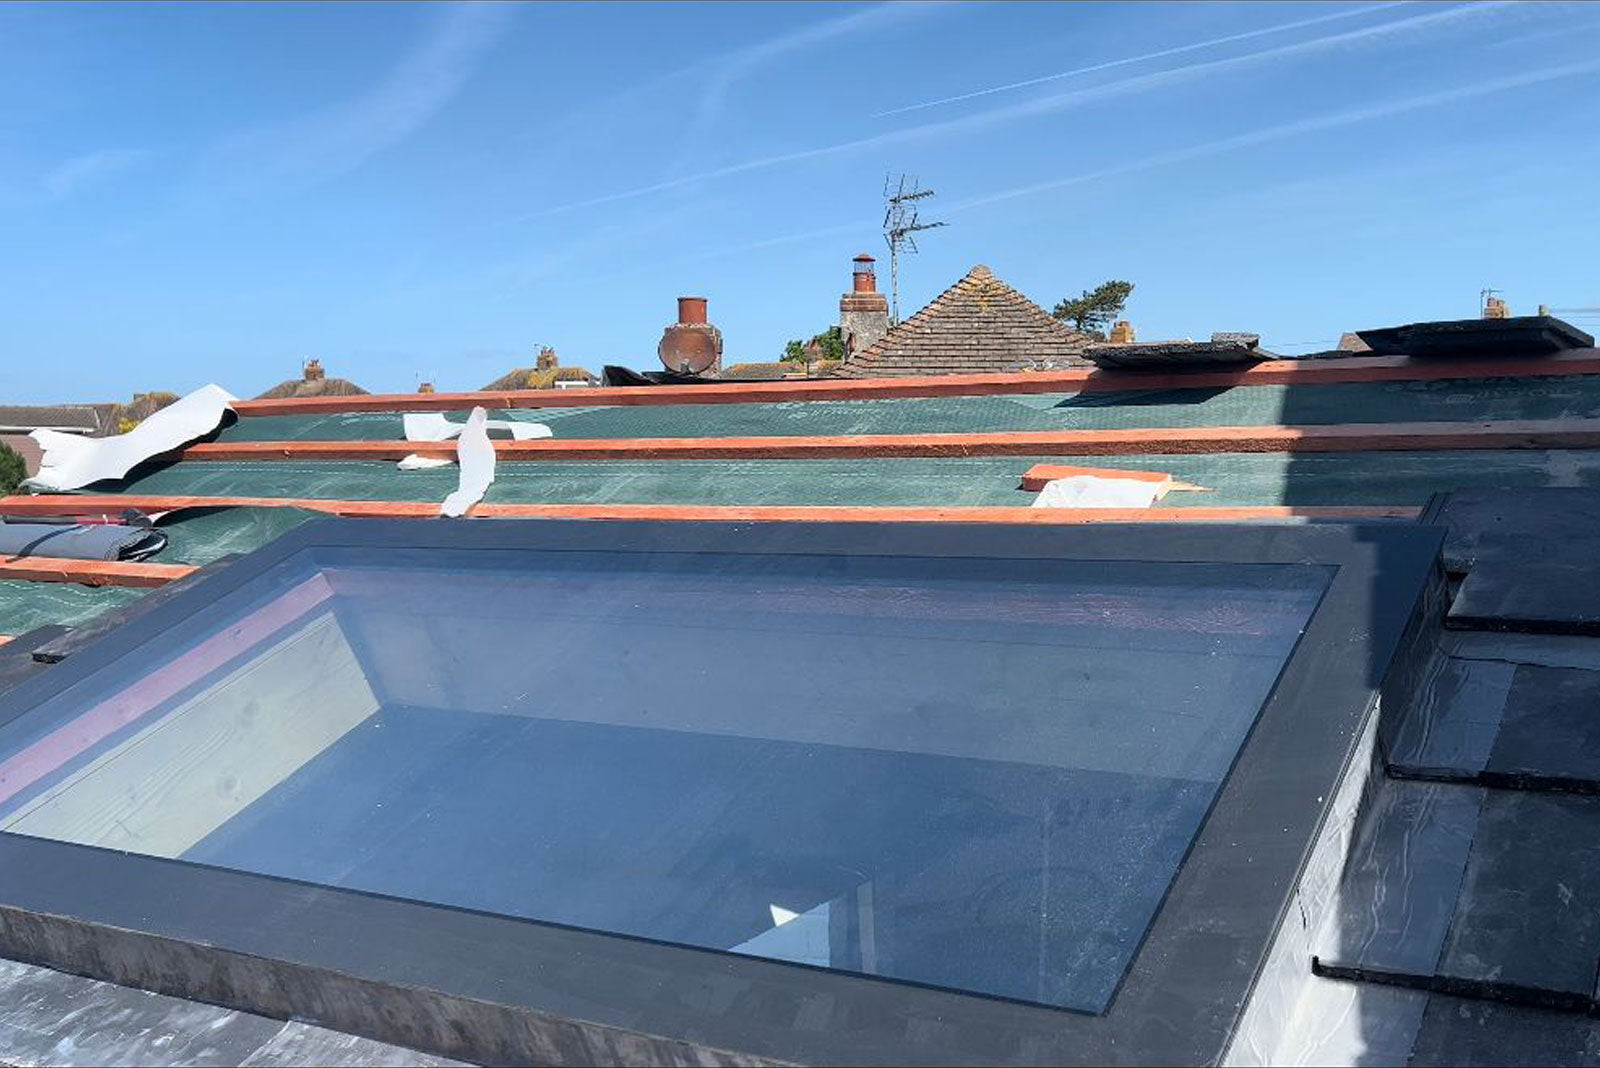 Pitched Roof Skylight 400 x 1500mm